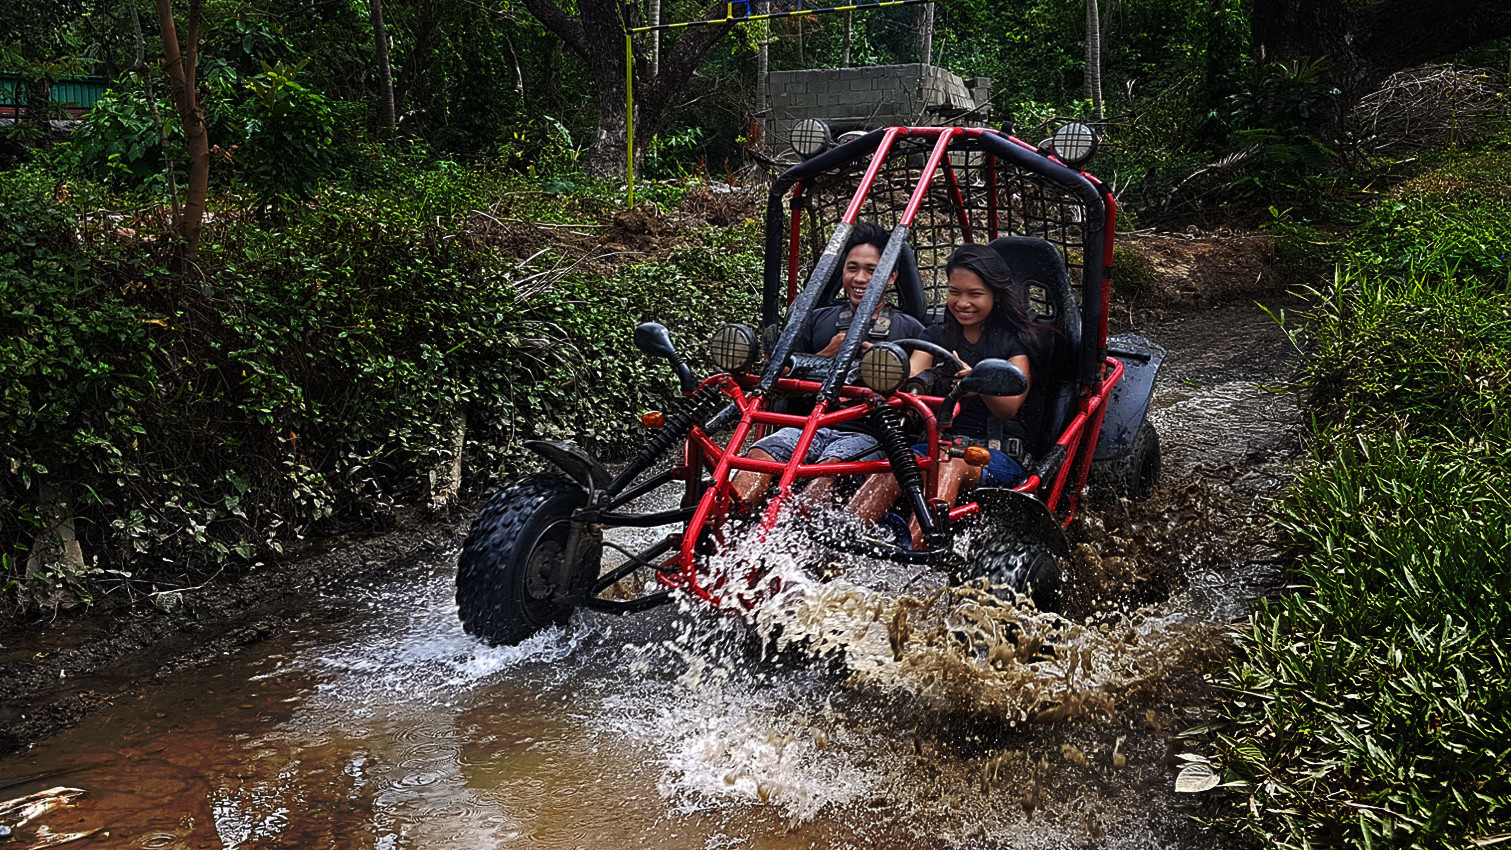 Extreme Sports Philippines Mud Karts one of the best activities near Puerto Galera White Beach and Sabang.